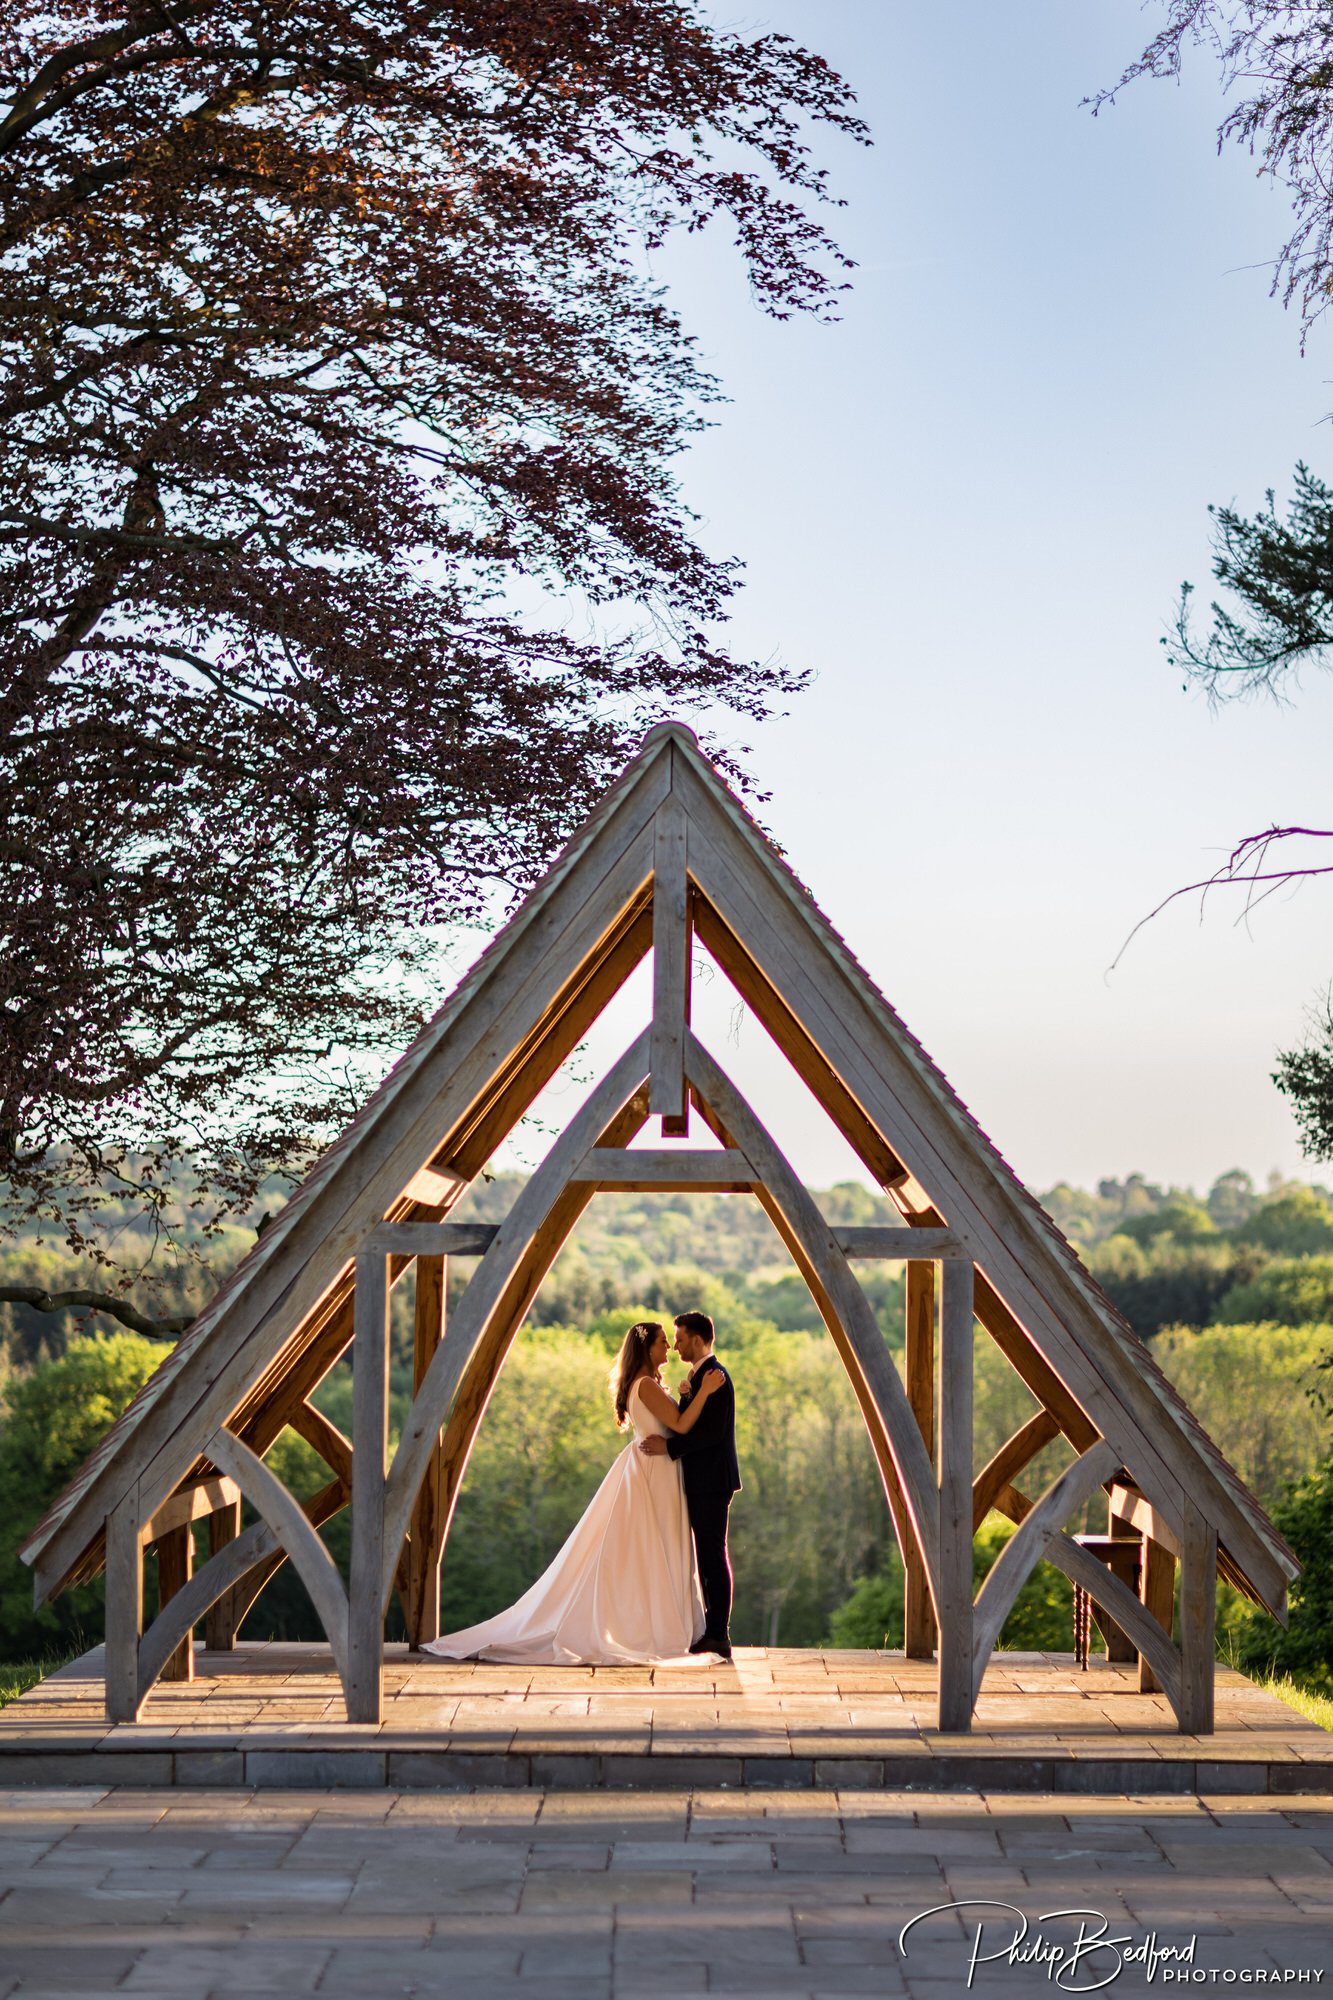 Bride and Groom under an arched gazebo at sunset